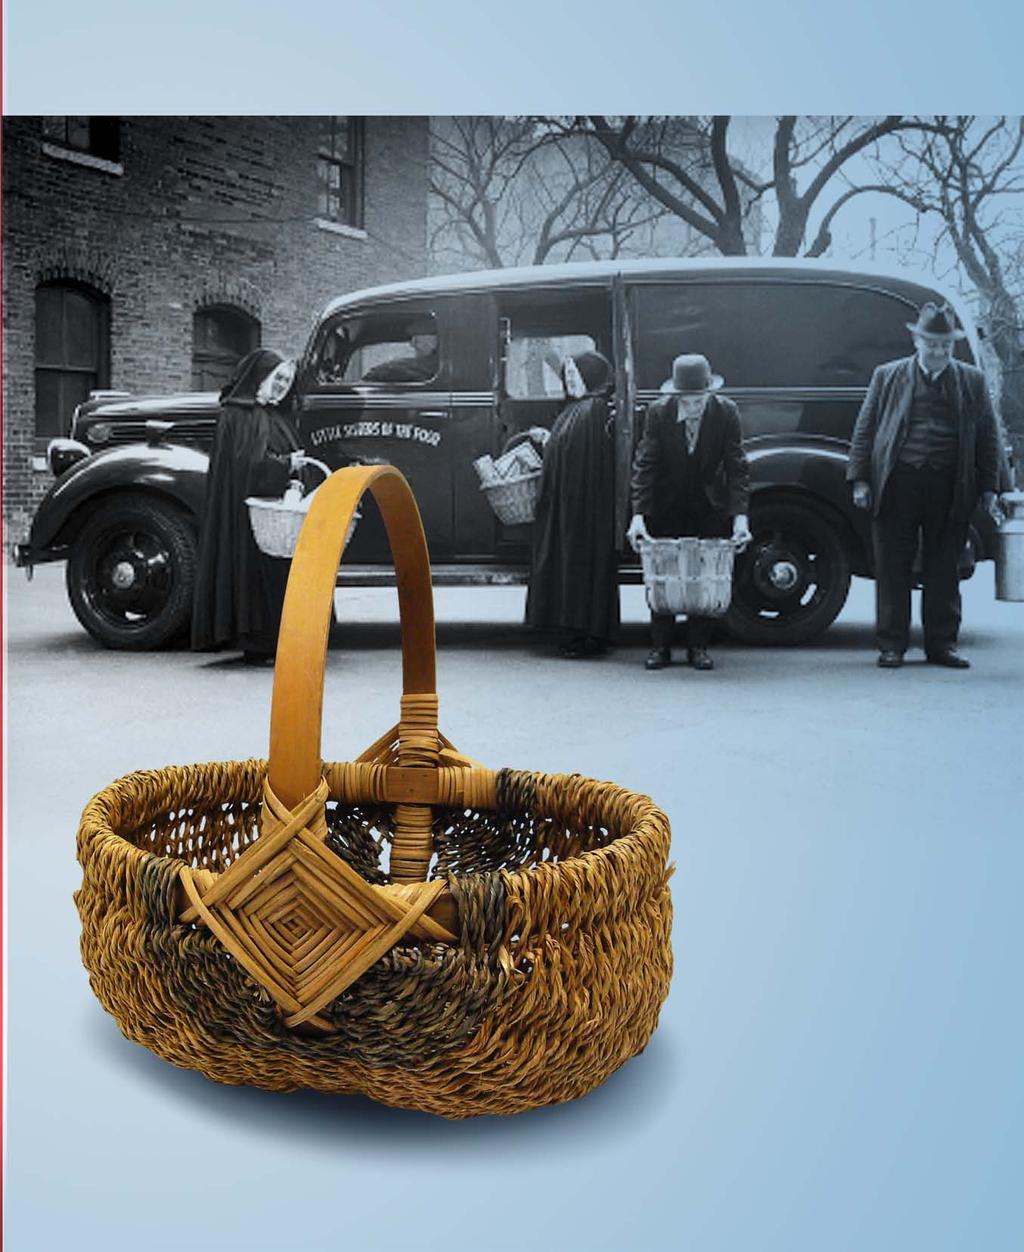 ABOVE: Little Sisters of the Poor returning from a begging trip, c. 1930. LEFT: Example of a begging basket used by the Little Sisters of the Poor.